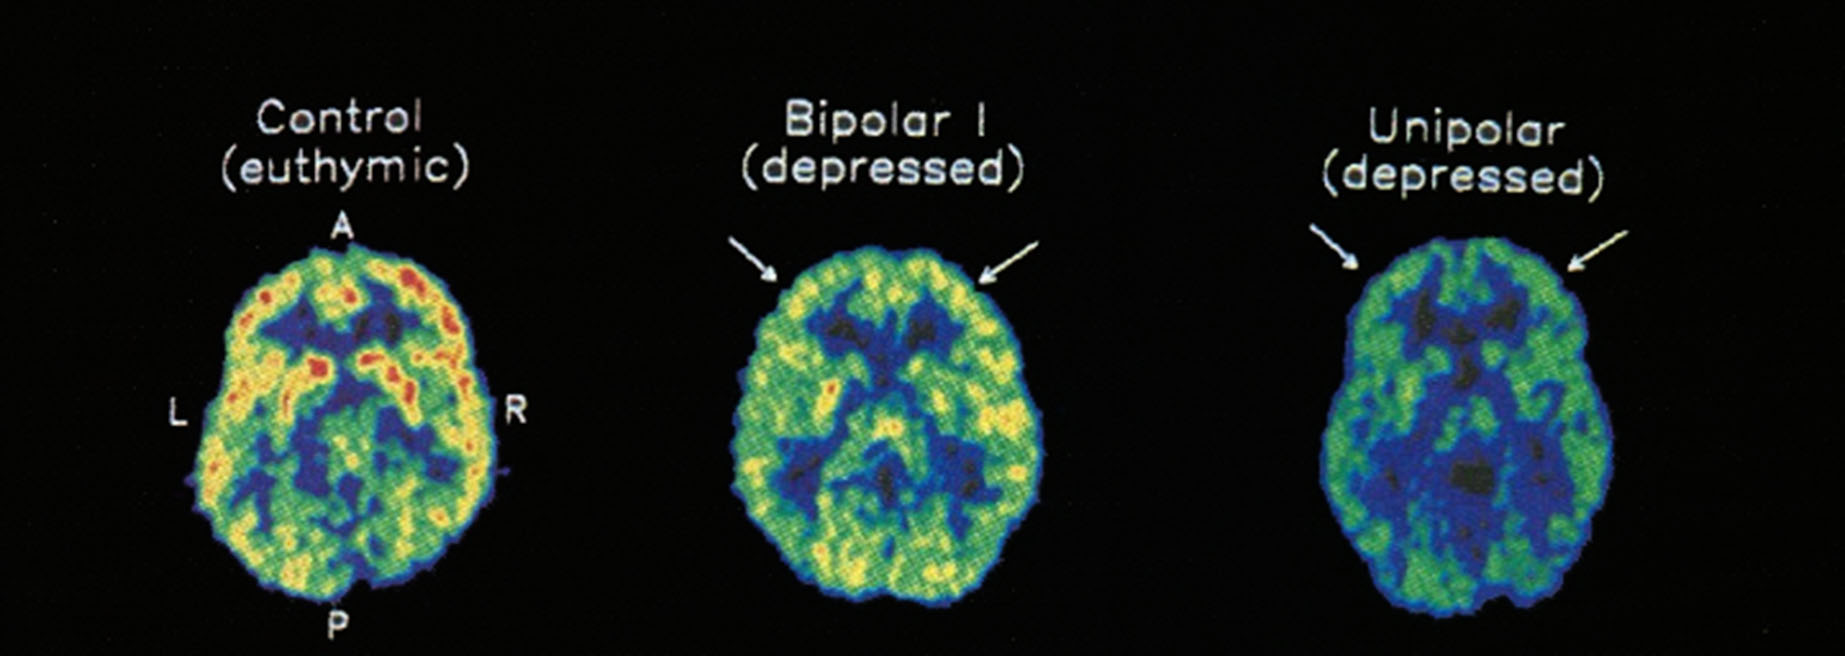 "PET scan taken of a healthy person (control), a bipolar depressed patient (incl phases of mania) and a depressed patient during performance tasks. Red/yellow areas show increased brain activity through measurement of glucose uptake. Source: Ketter et al (2)." From: Christine Webber